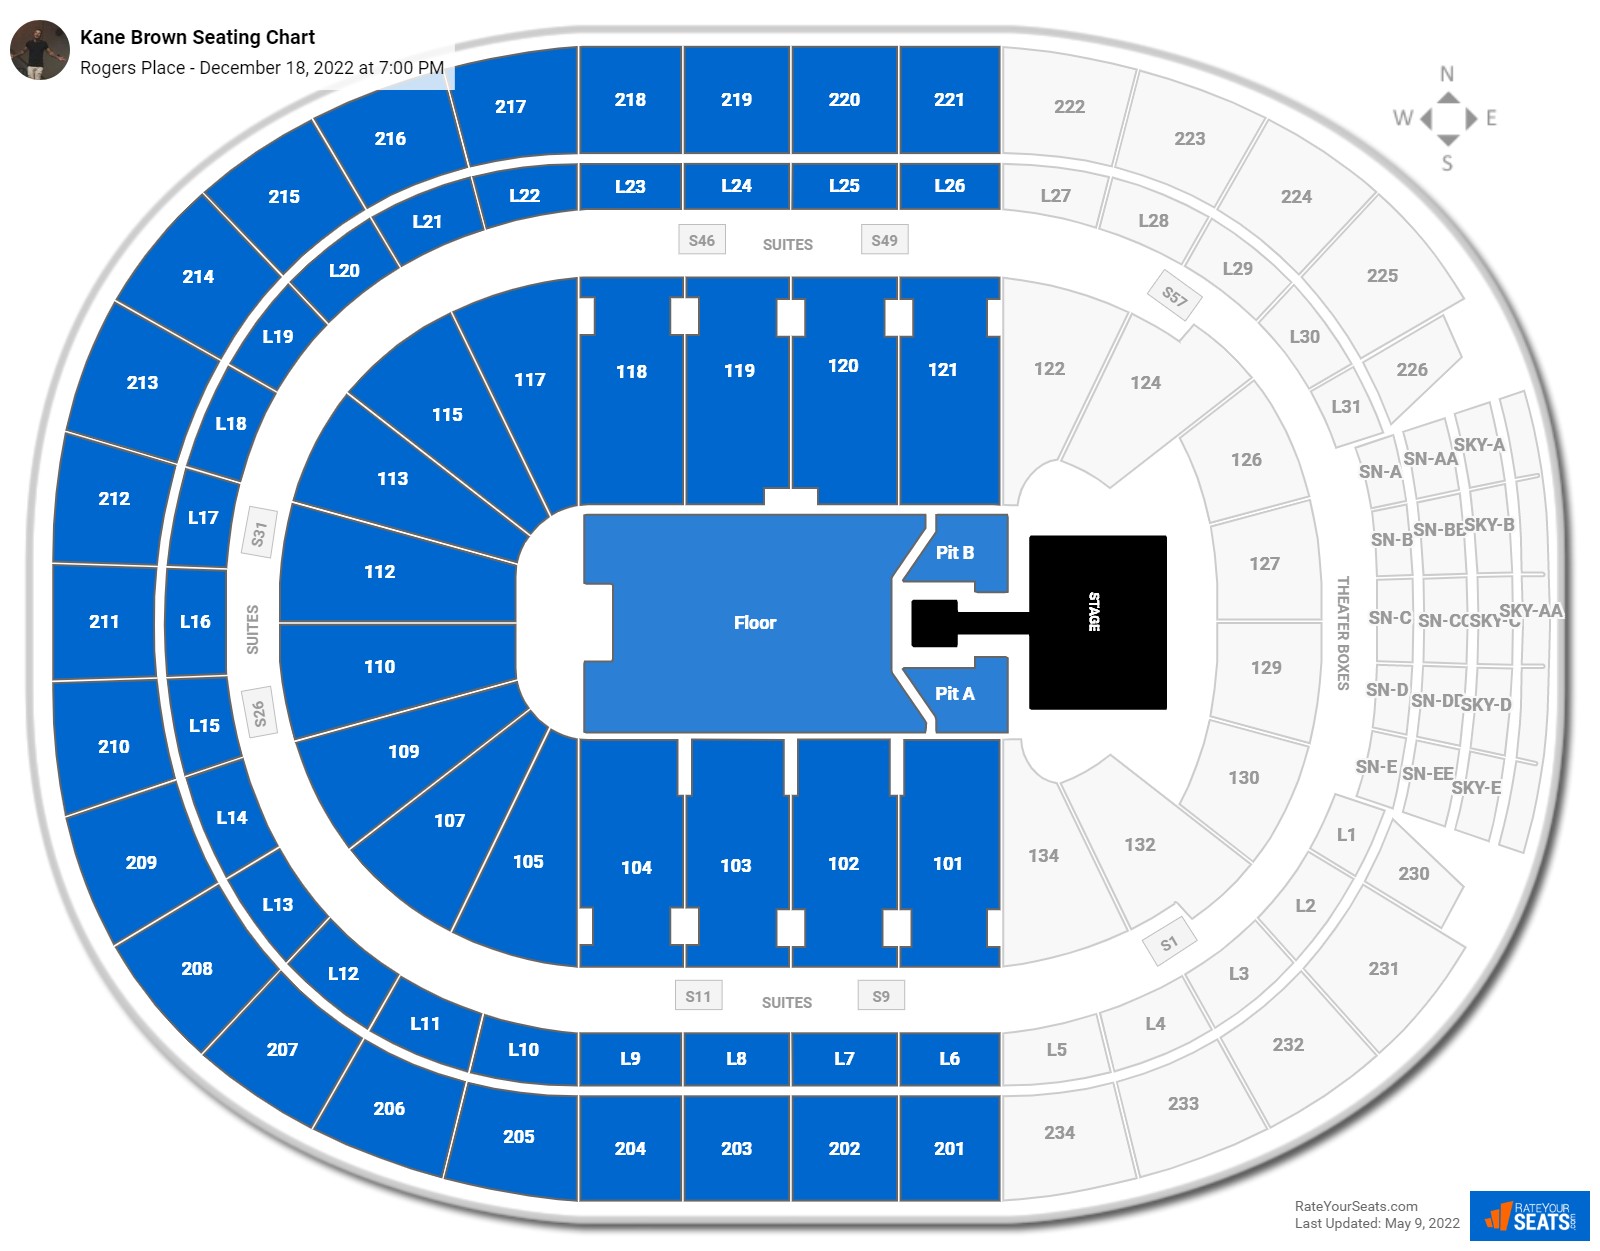 Kane Brown Rogers Place Seating Chart December 18 2022 3944182 